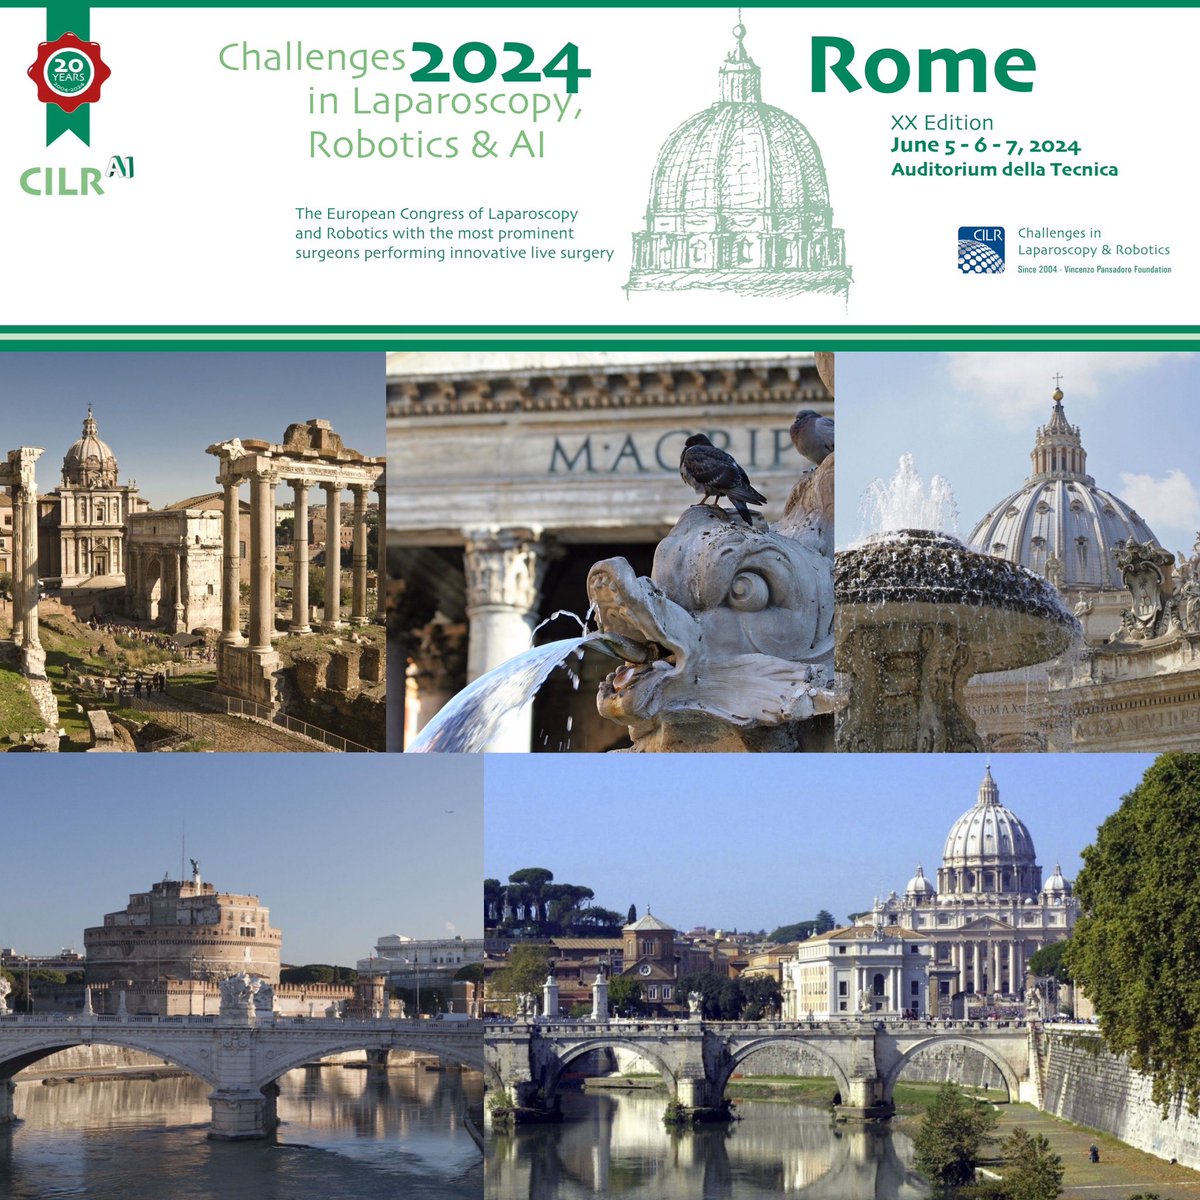 Finally, here is #CILR24 Program!! bit.ly/CILRProgram (Please note that this is a preliminary subject to changes according to cases available) 3 days of surgical excellence and inspiration in Rome with the world's top surgeons!